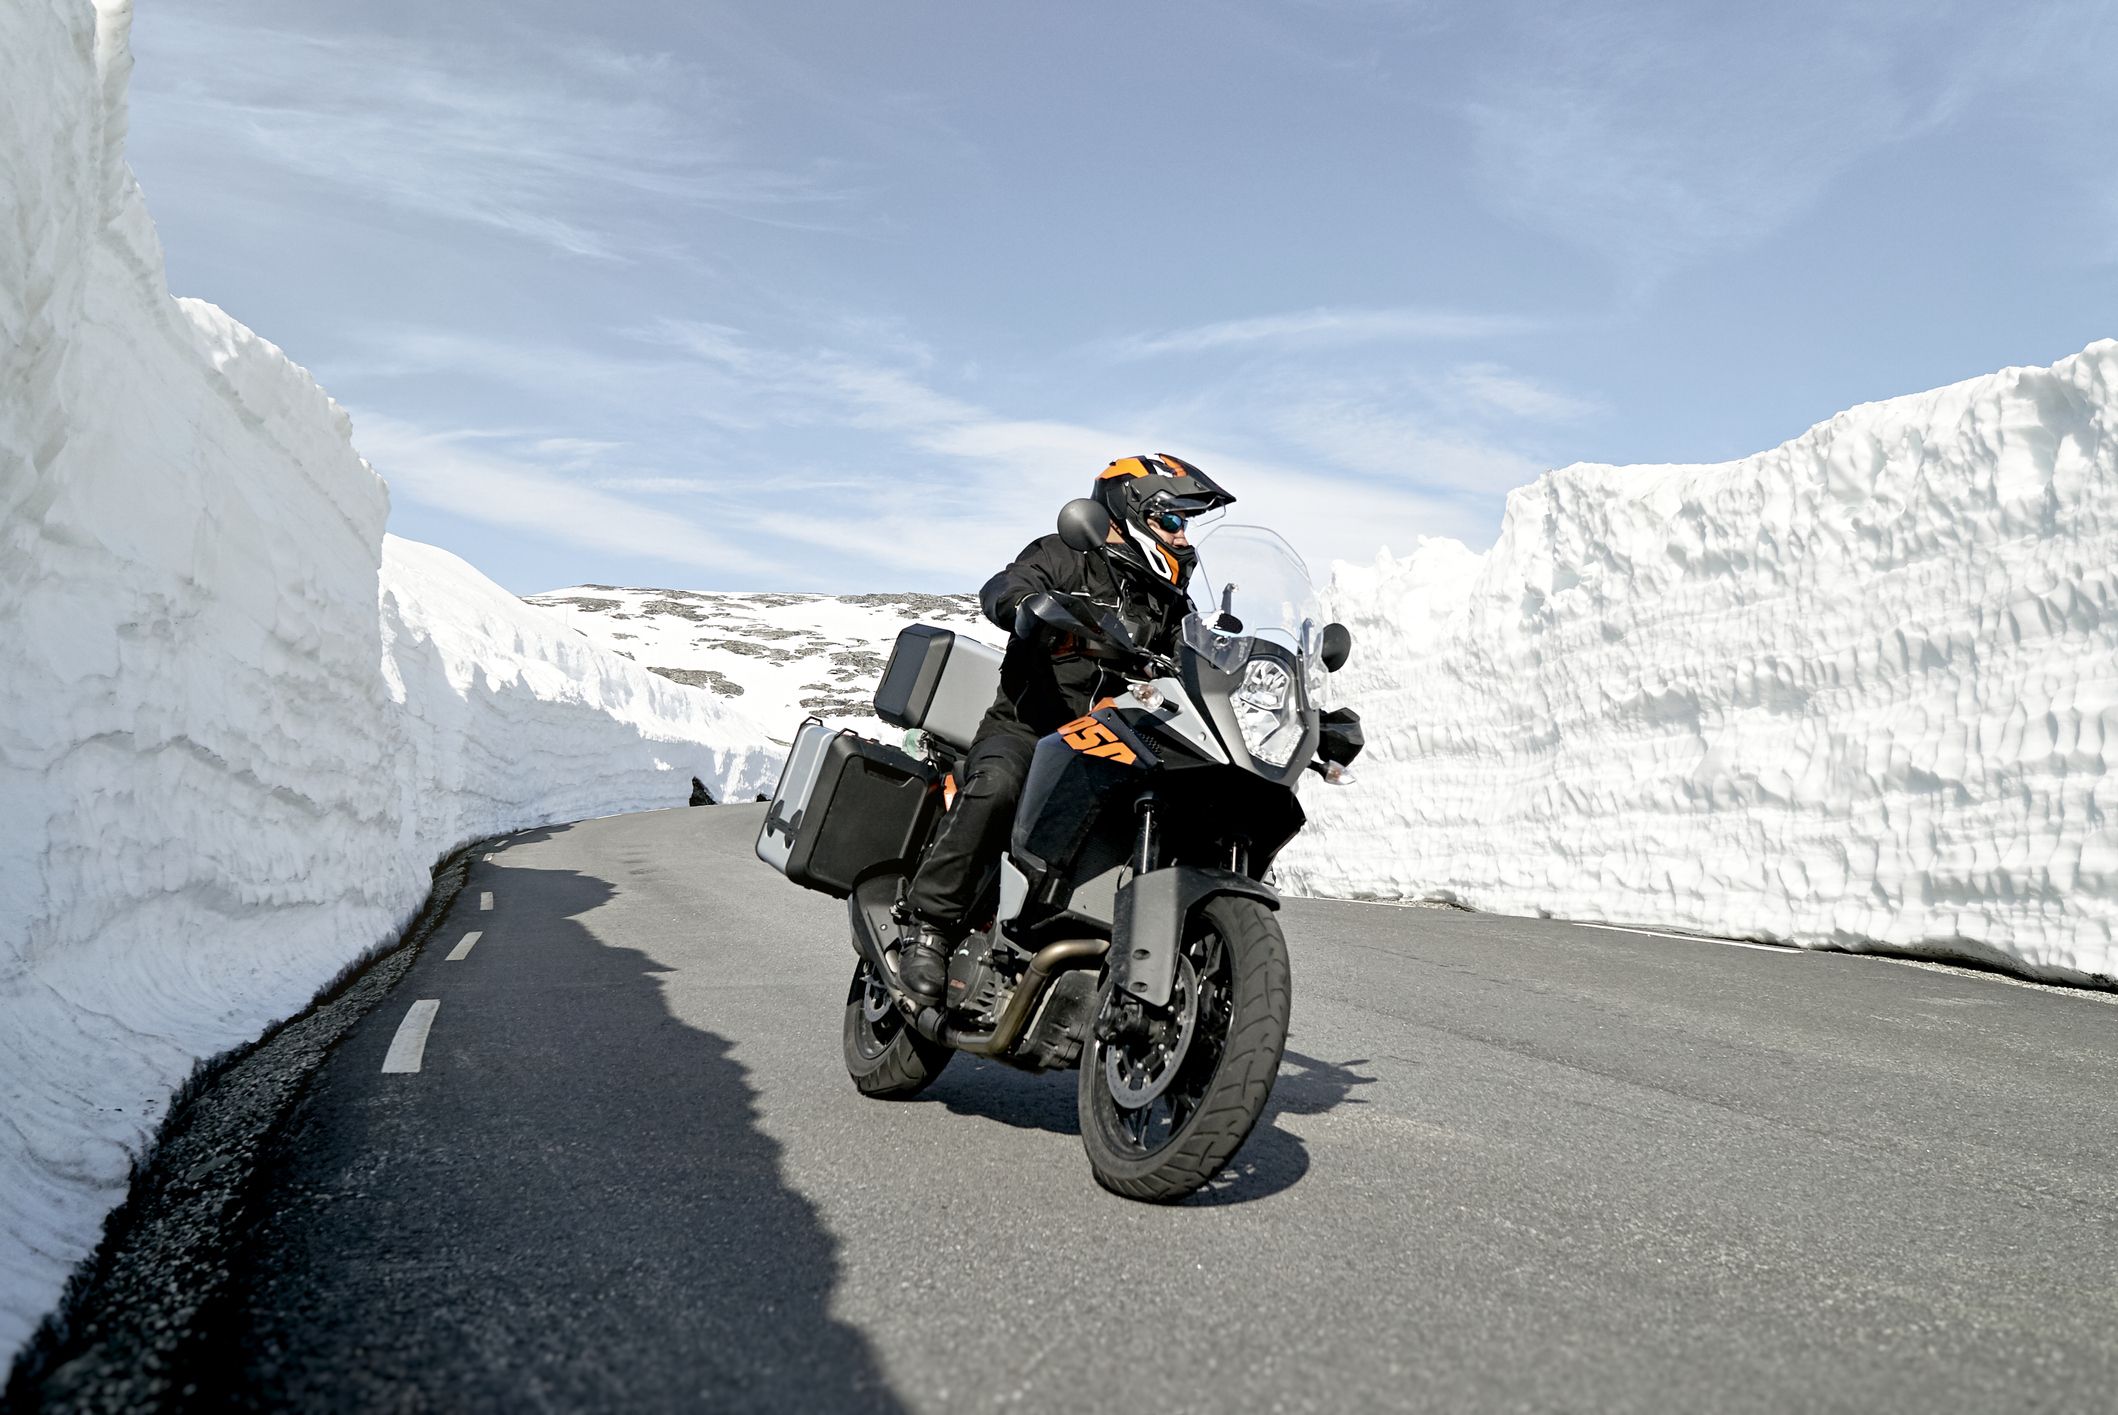 Feel the adrenaline rush as a motorcyclist speeds through a snow-cleared highway on a powerful bike